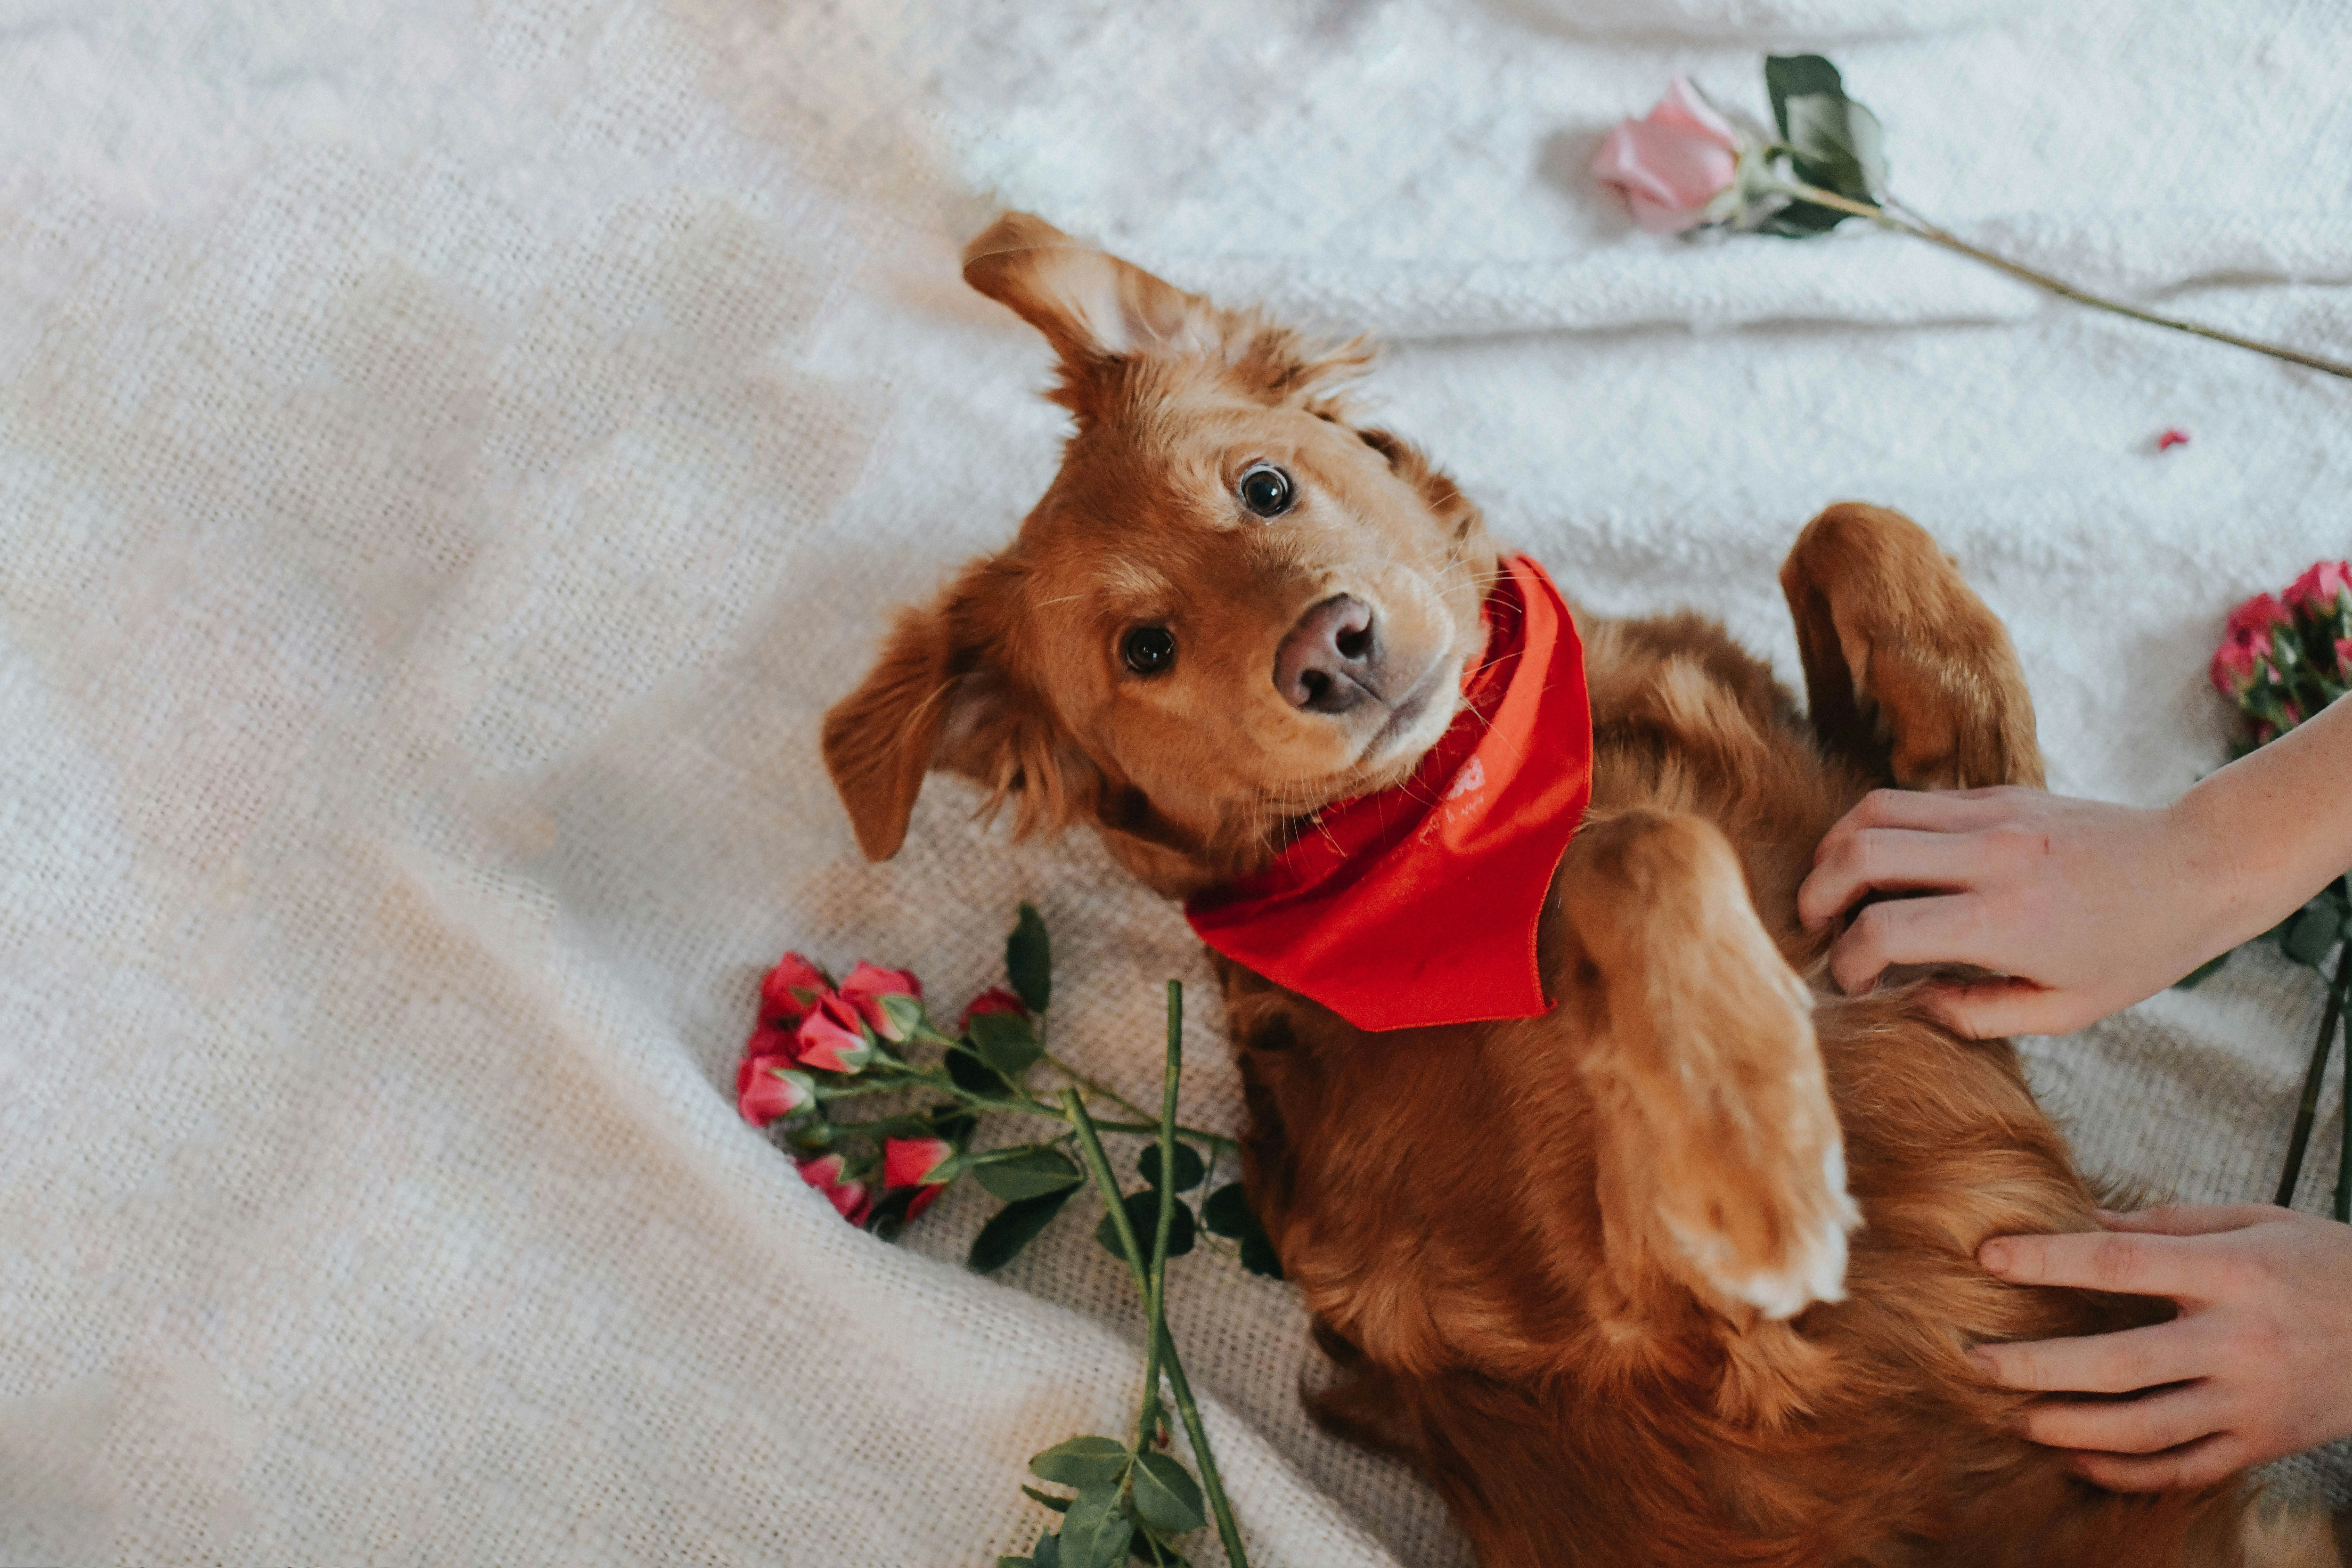 Puppy lying in bed with red bandana around neck and a few red and pink flowers around them